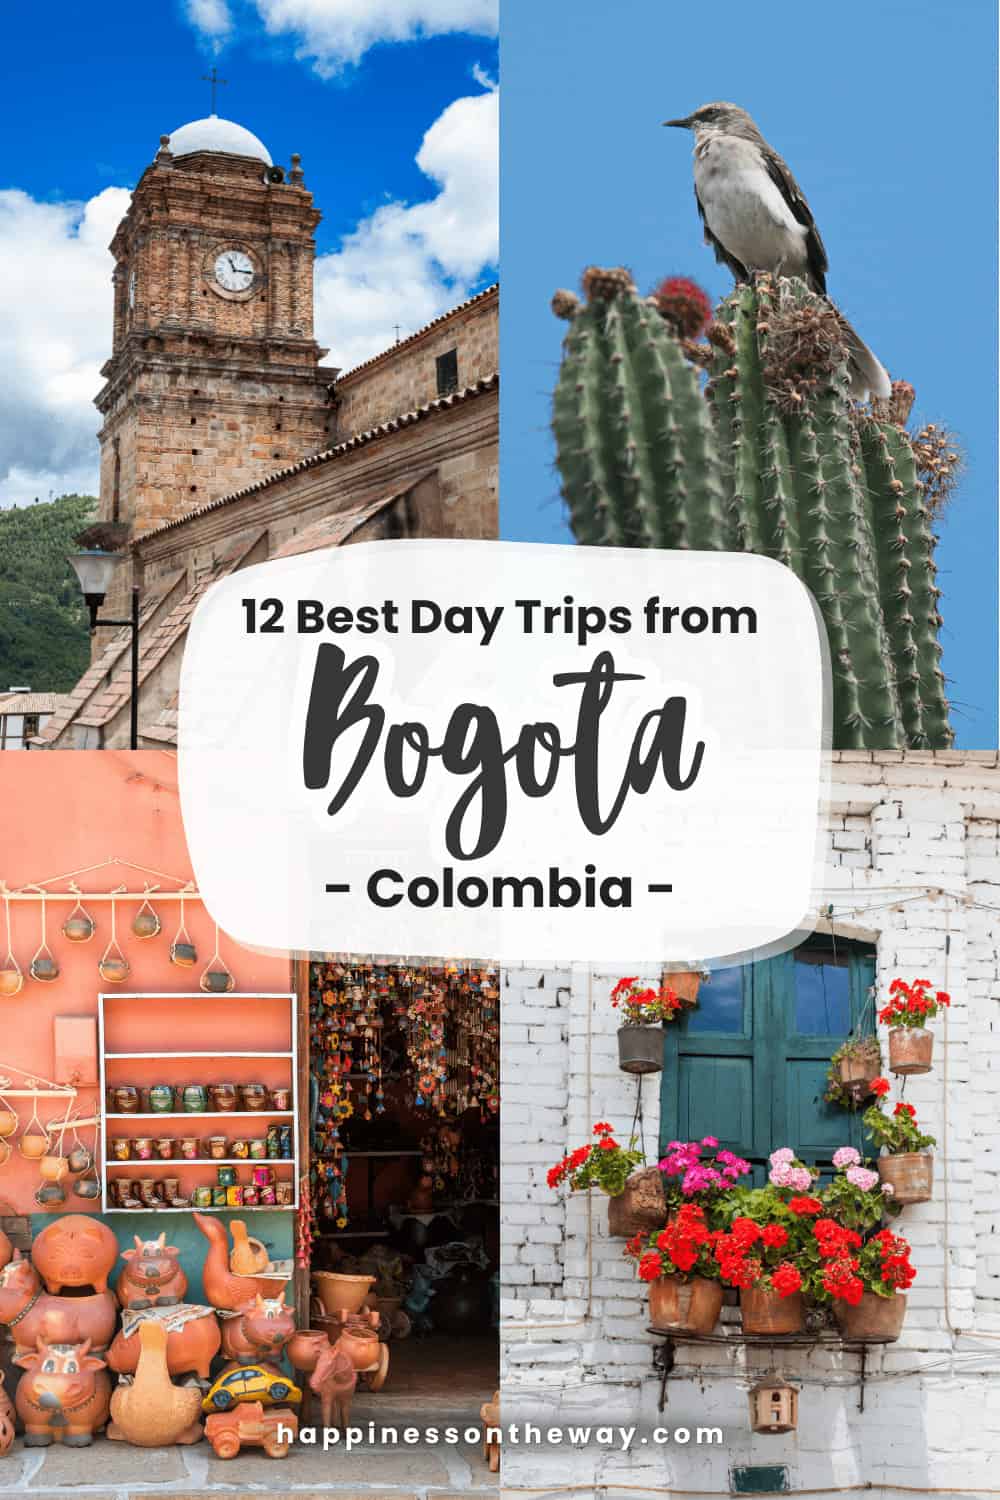 The 12 Most Beautiful Day Trips From Bogota